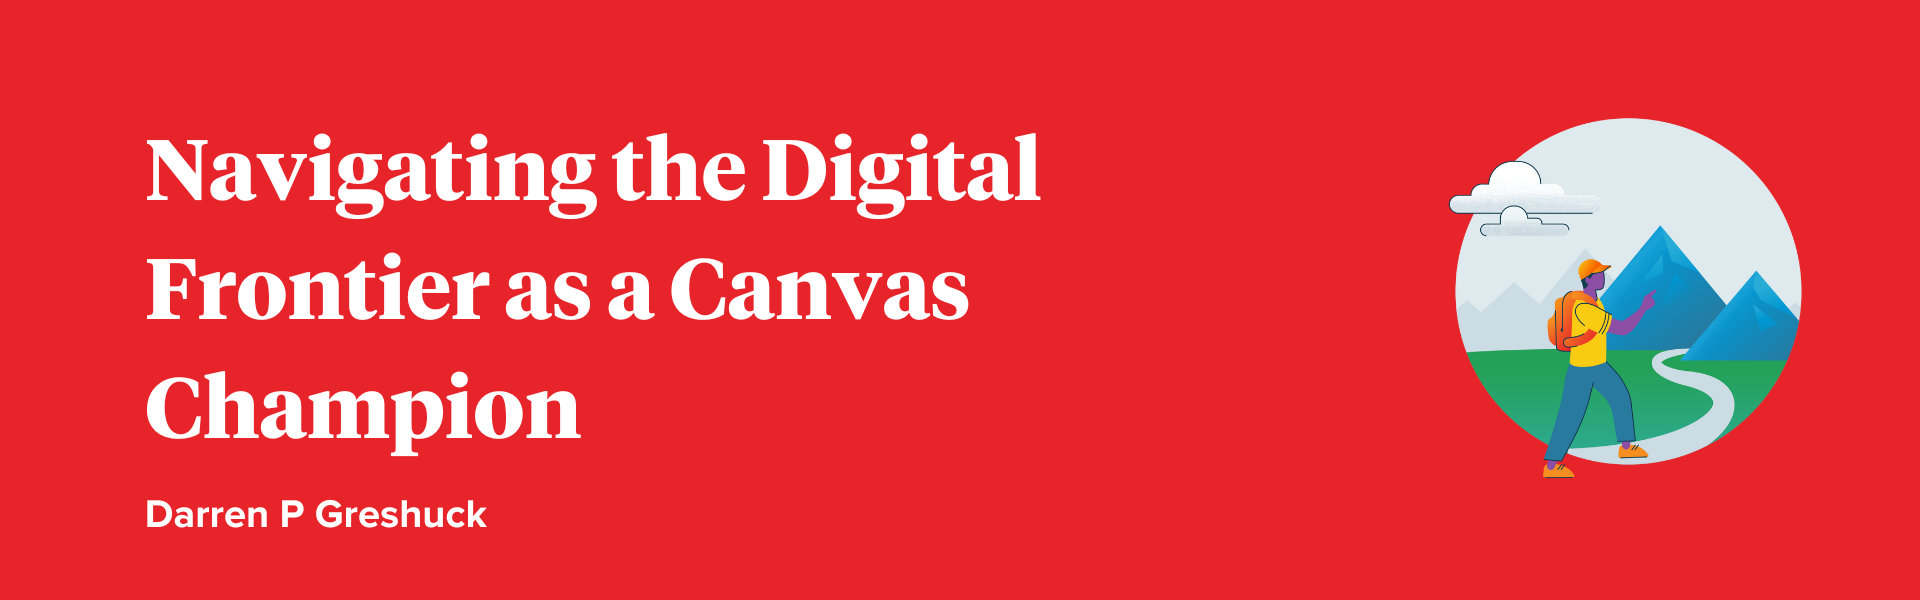 red background with white text that reads "navigating the digital frontier as a canvas champion"